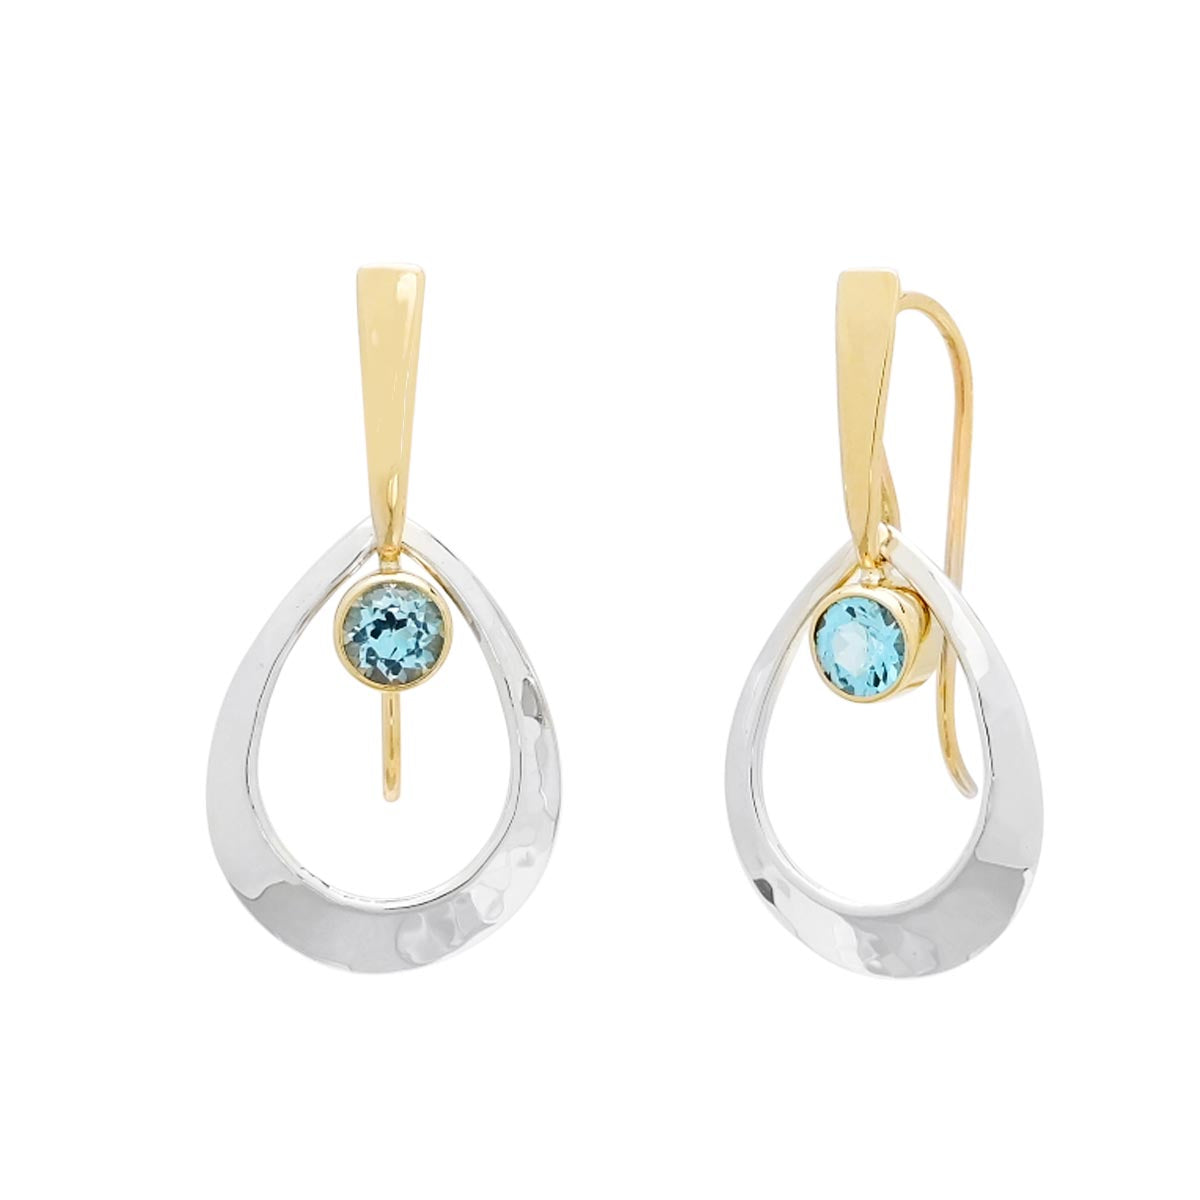 E.L. Designs Blue Topaz Emma Drop Earrings in Sterling Silver and 14kt Yellow Gold